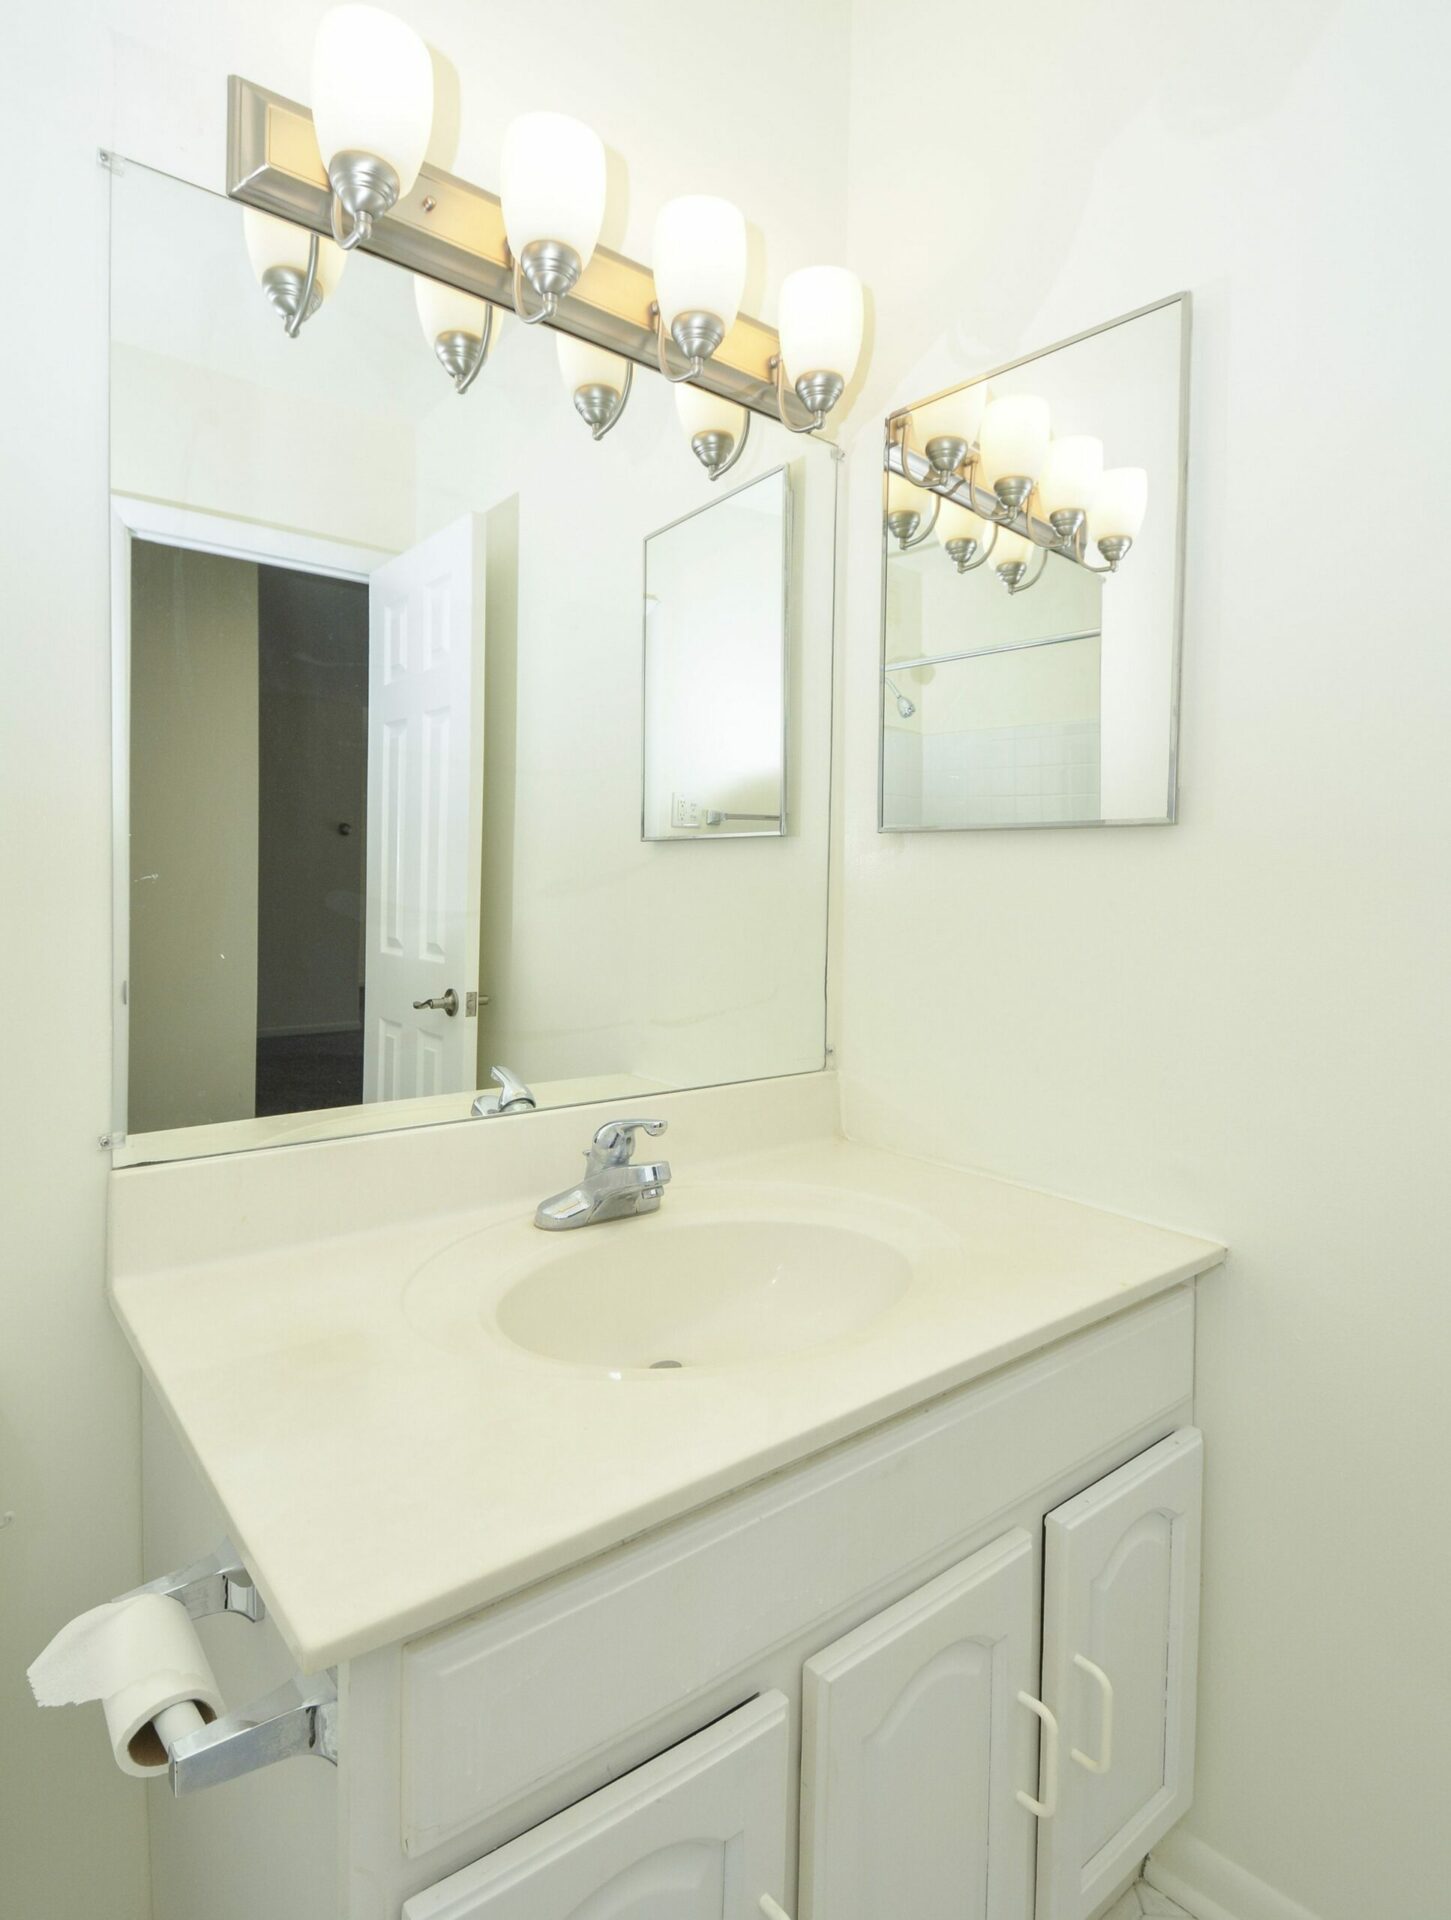 Bathroom with a large mirror, a sink with white countertops and cabinets, and vanity lights.